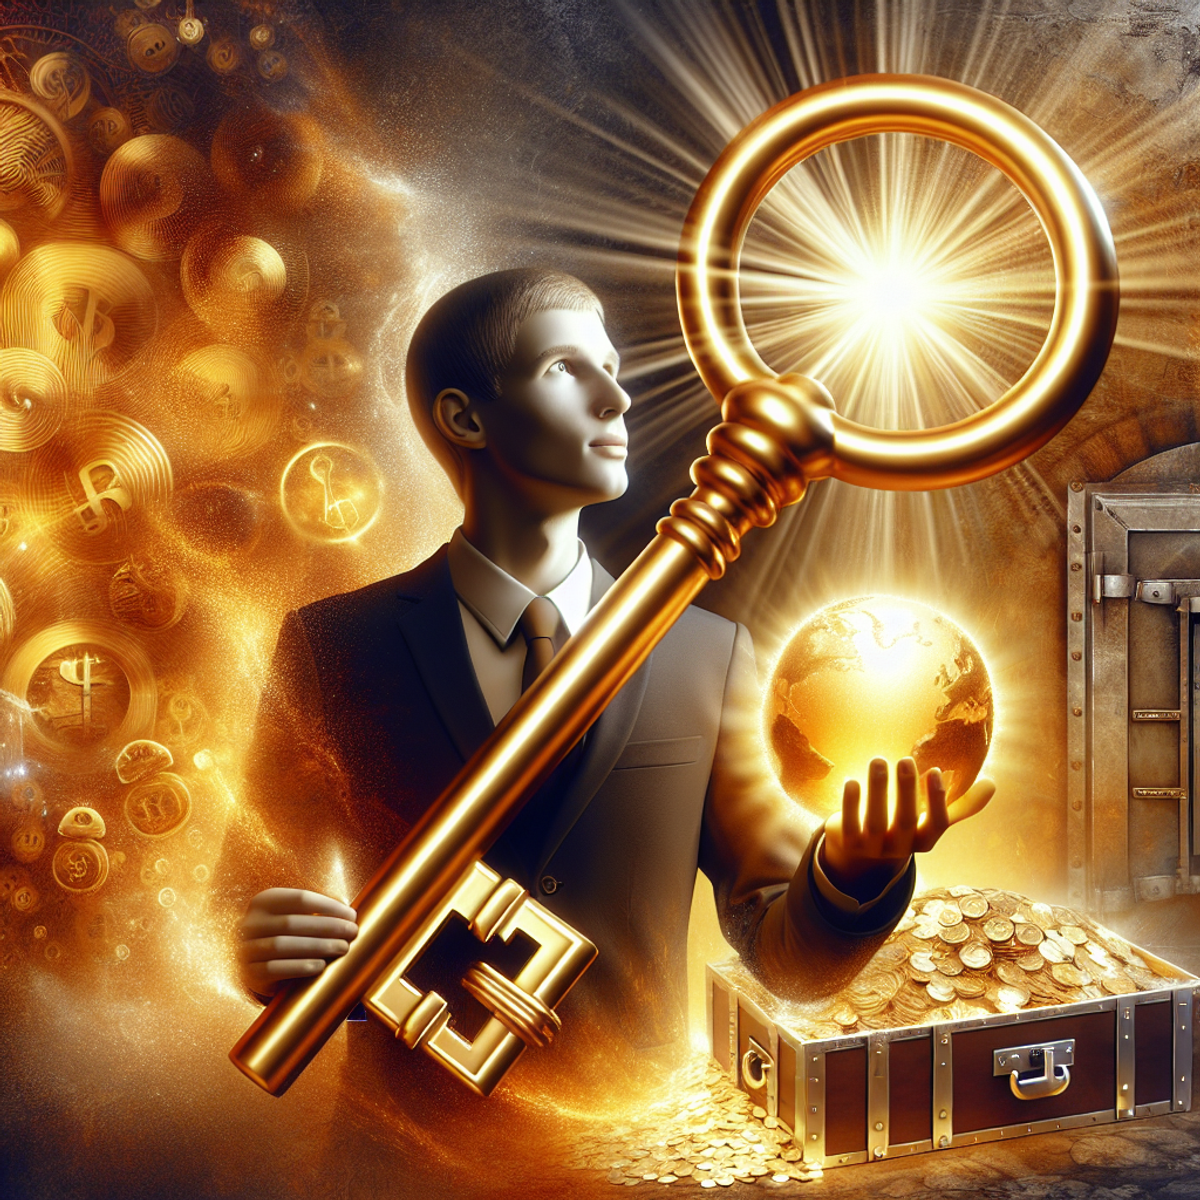 A person holds a radiant golden key, their face hopeful and confident, with elements of prosperity like treasure chests and piles of gold coins in the warm, inviting background.